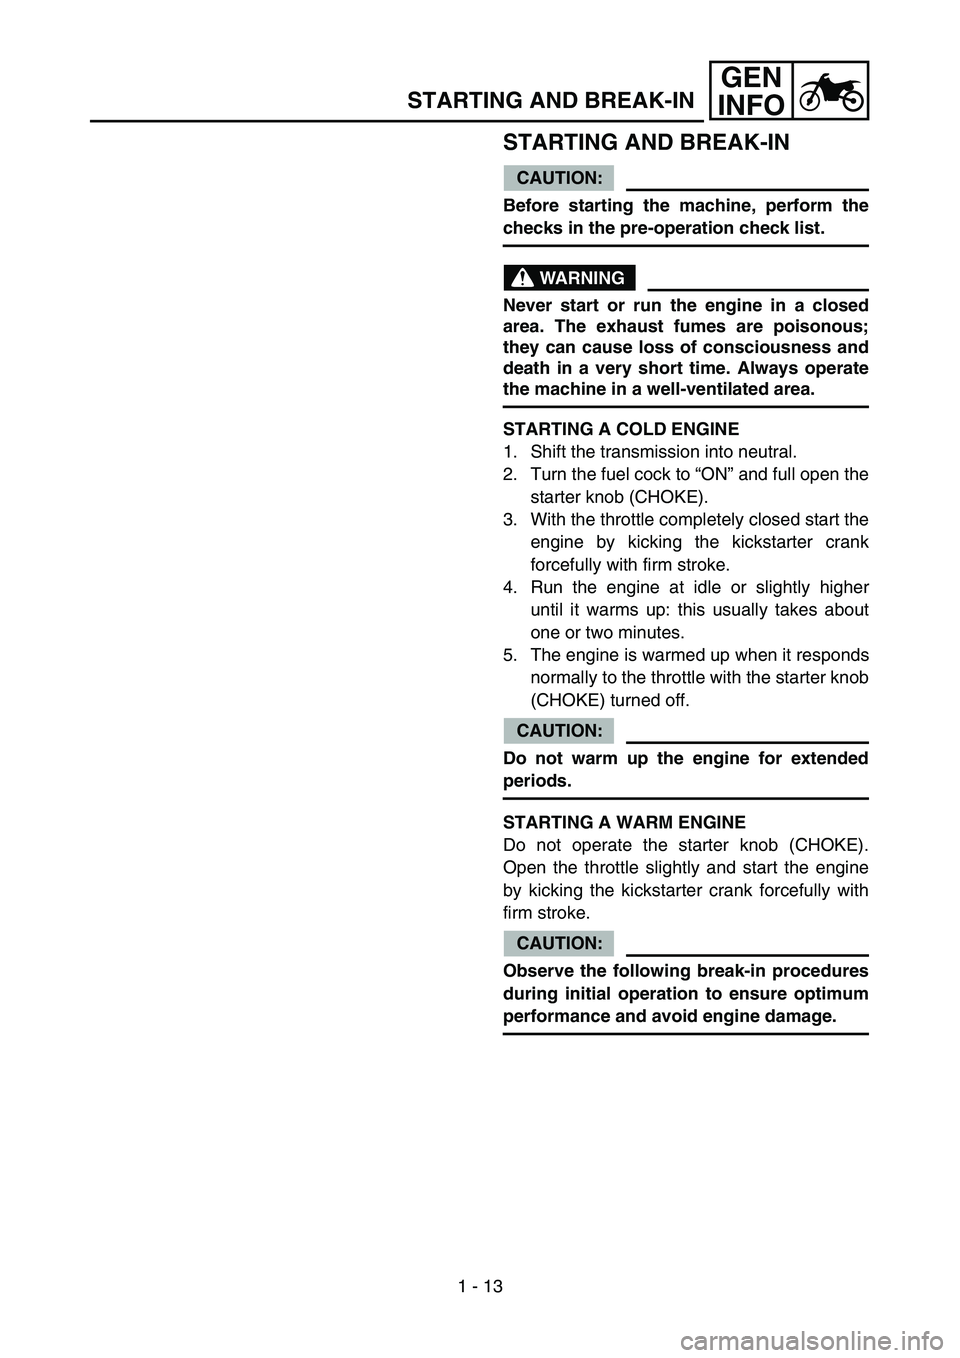 YAMAHA YZ85 2004  Owners Manual 1 - 13
GEN
INFO
STARTING AND BREAK-IN
STARTING AND BREAK-IN
CAUTION:
Before starting the machine, perform the
checks in the pre-operation check list.
WARNING
Never start or run the engine in a closed
